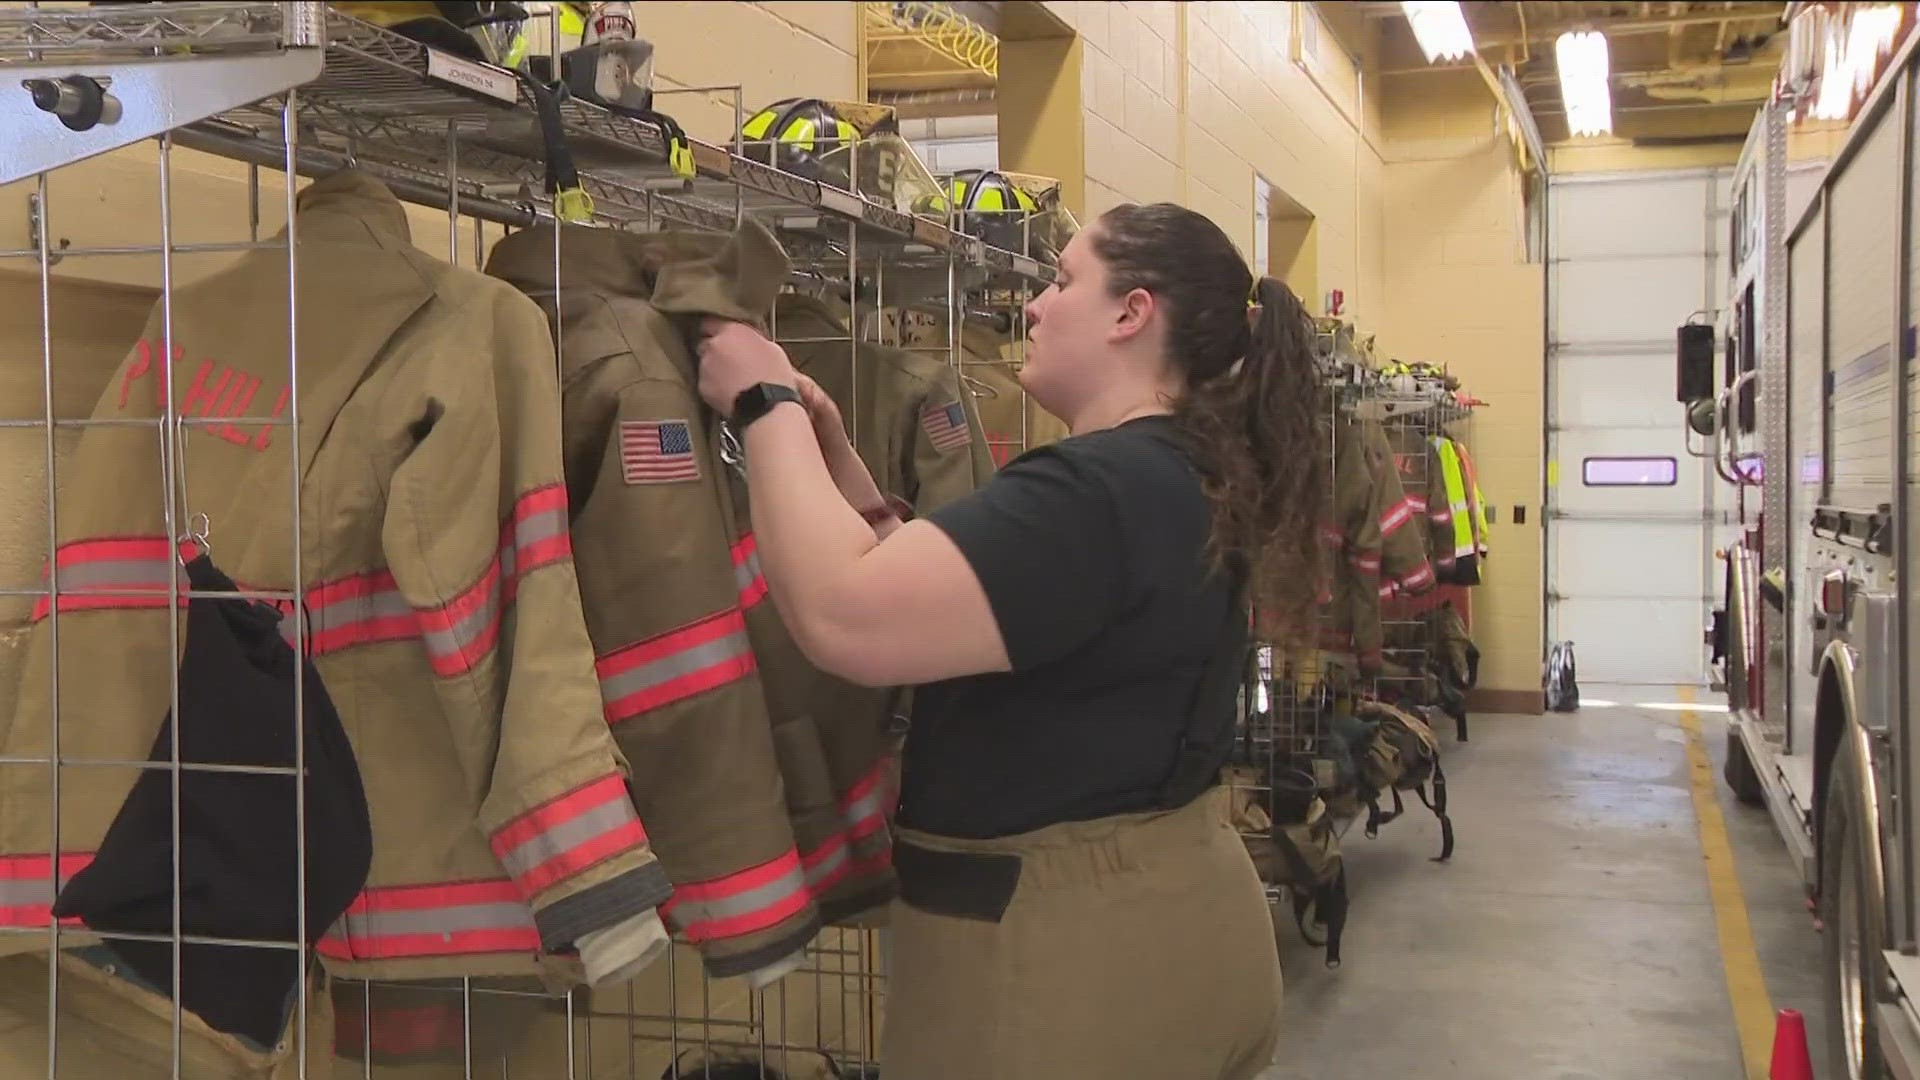 That experience over a decade ago set Jessica Calandra on a new life path. 
One that has now led her to now becoming Chief of the Pine Hill Hose Company